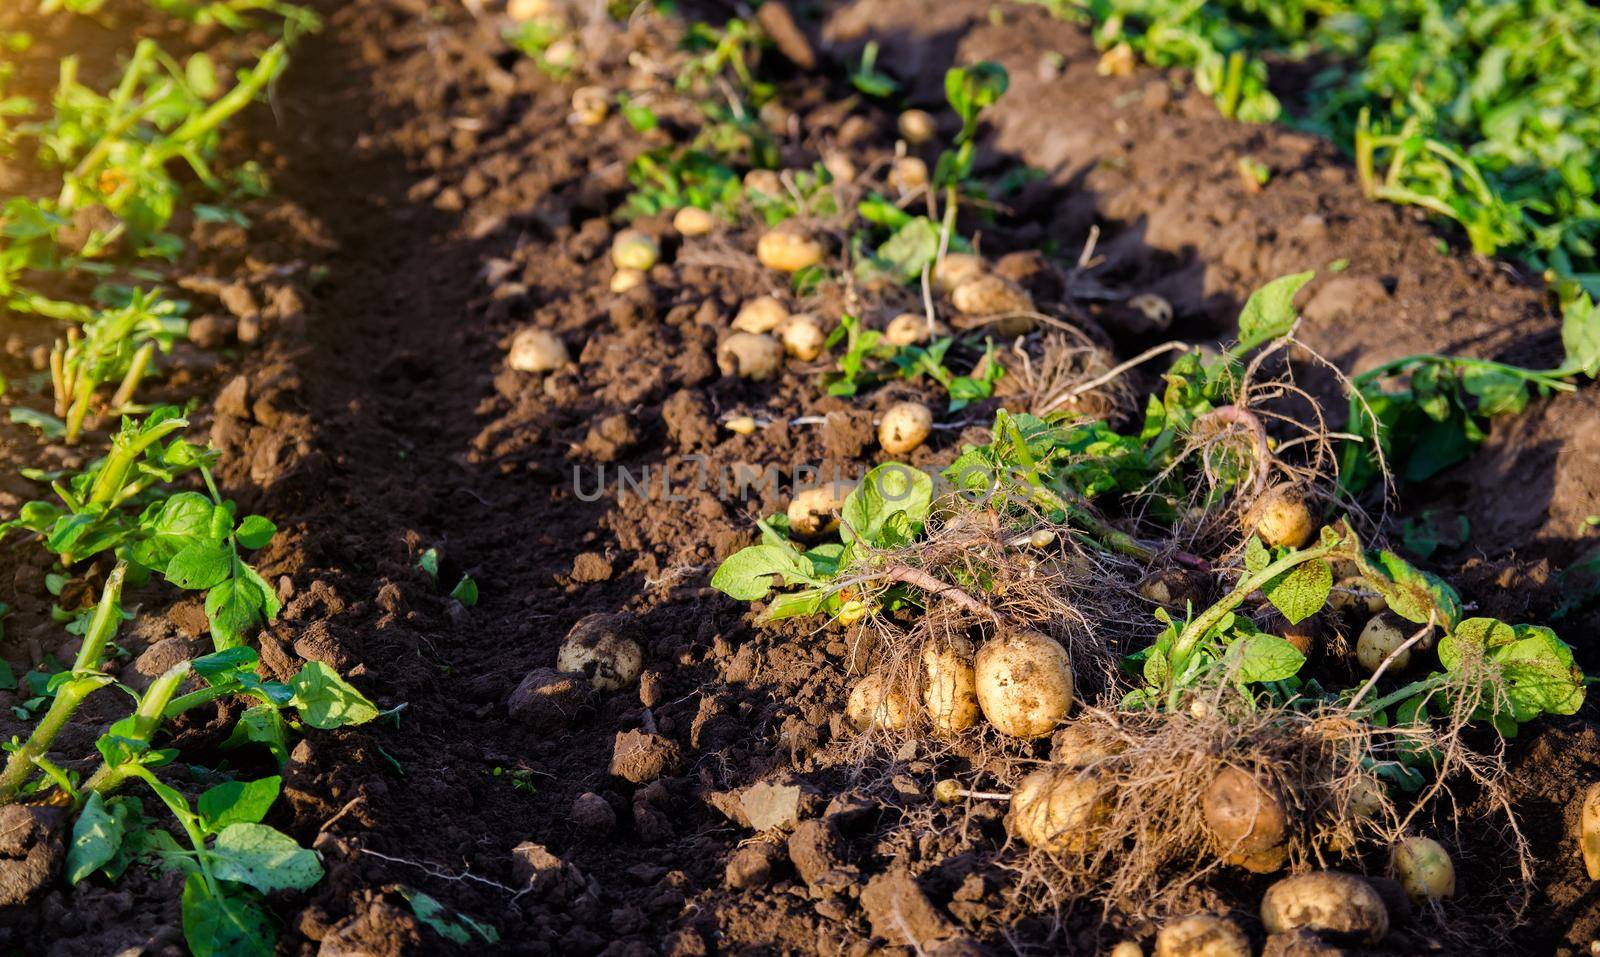 Fresh potatoes on ground. Freshly dug organic potato vegetables lie on moist, loose ground with tops. Agricultural production. Bountiful harvest Growing food on the farm field. Gardening and farming.